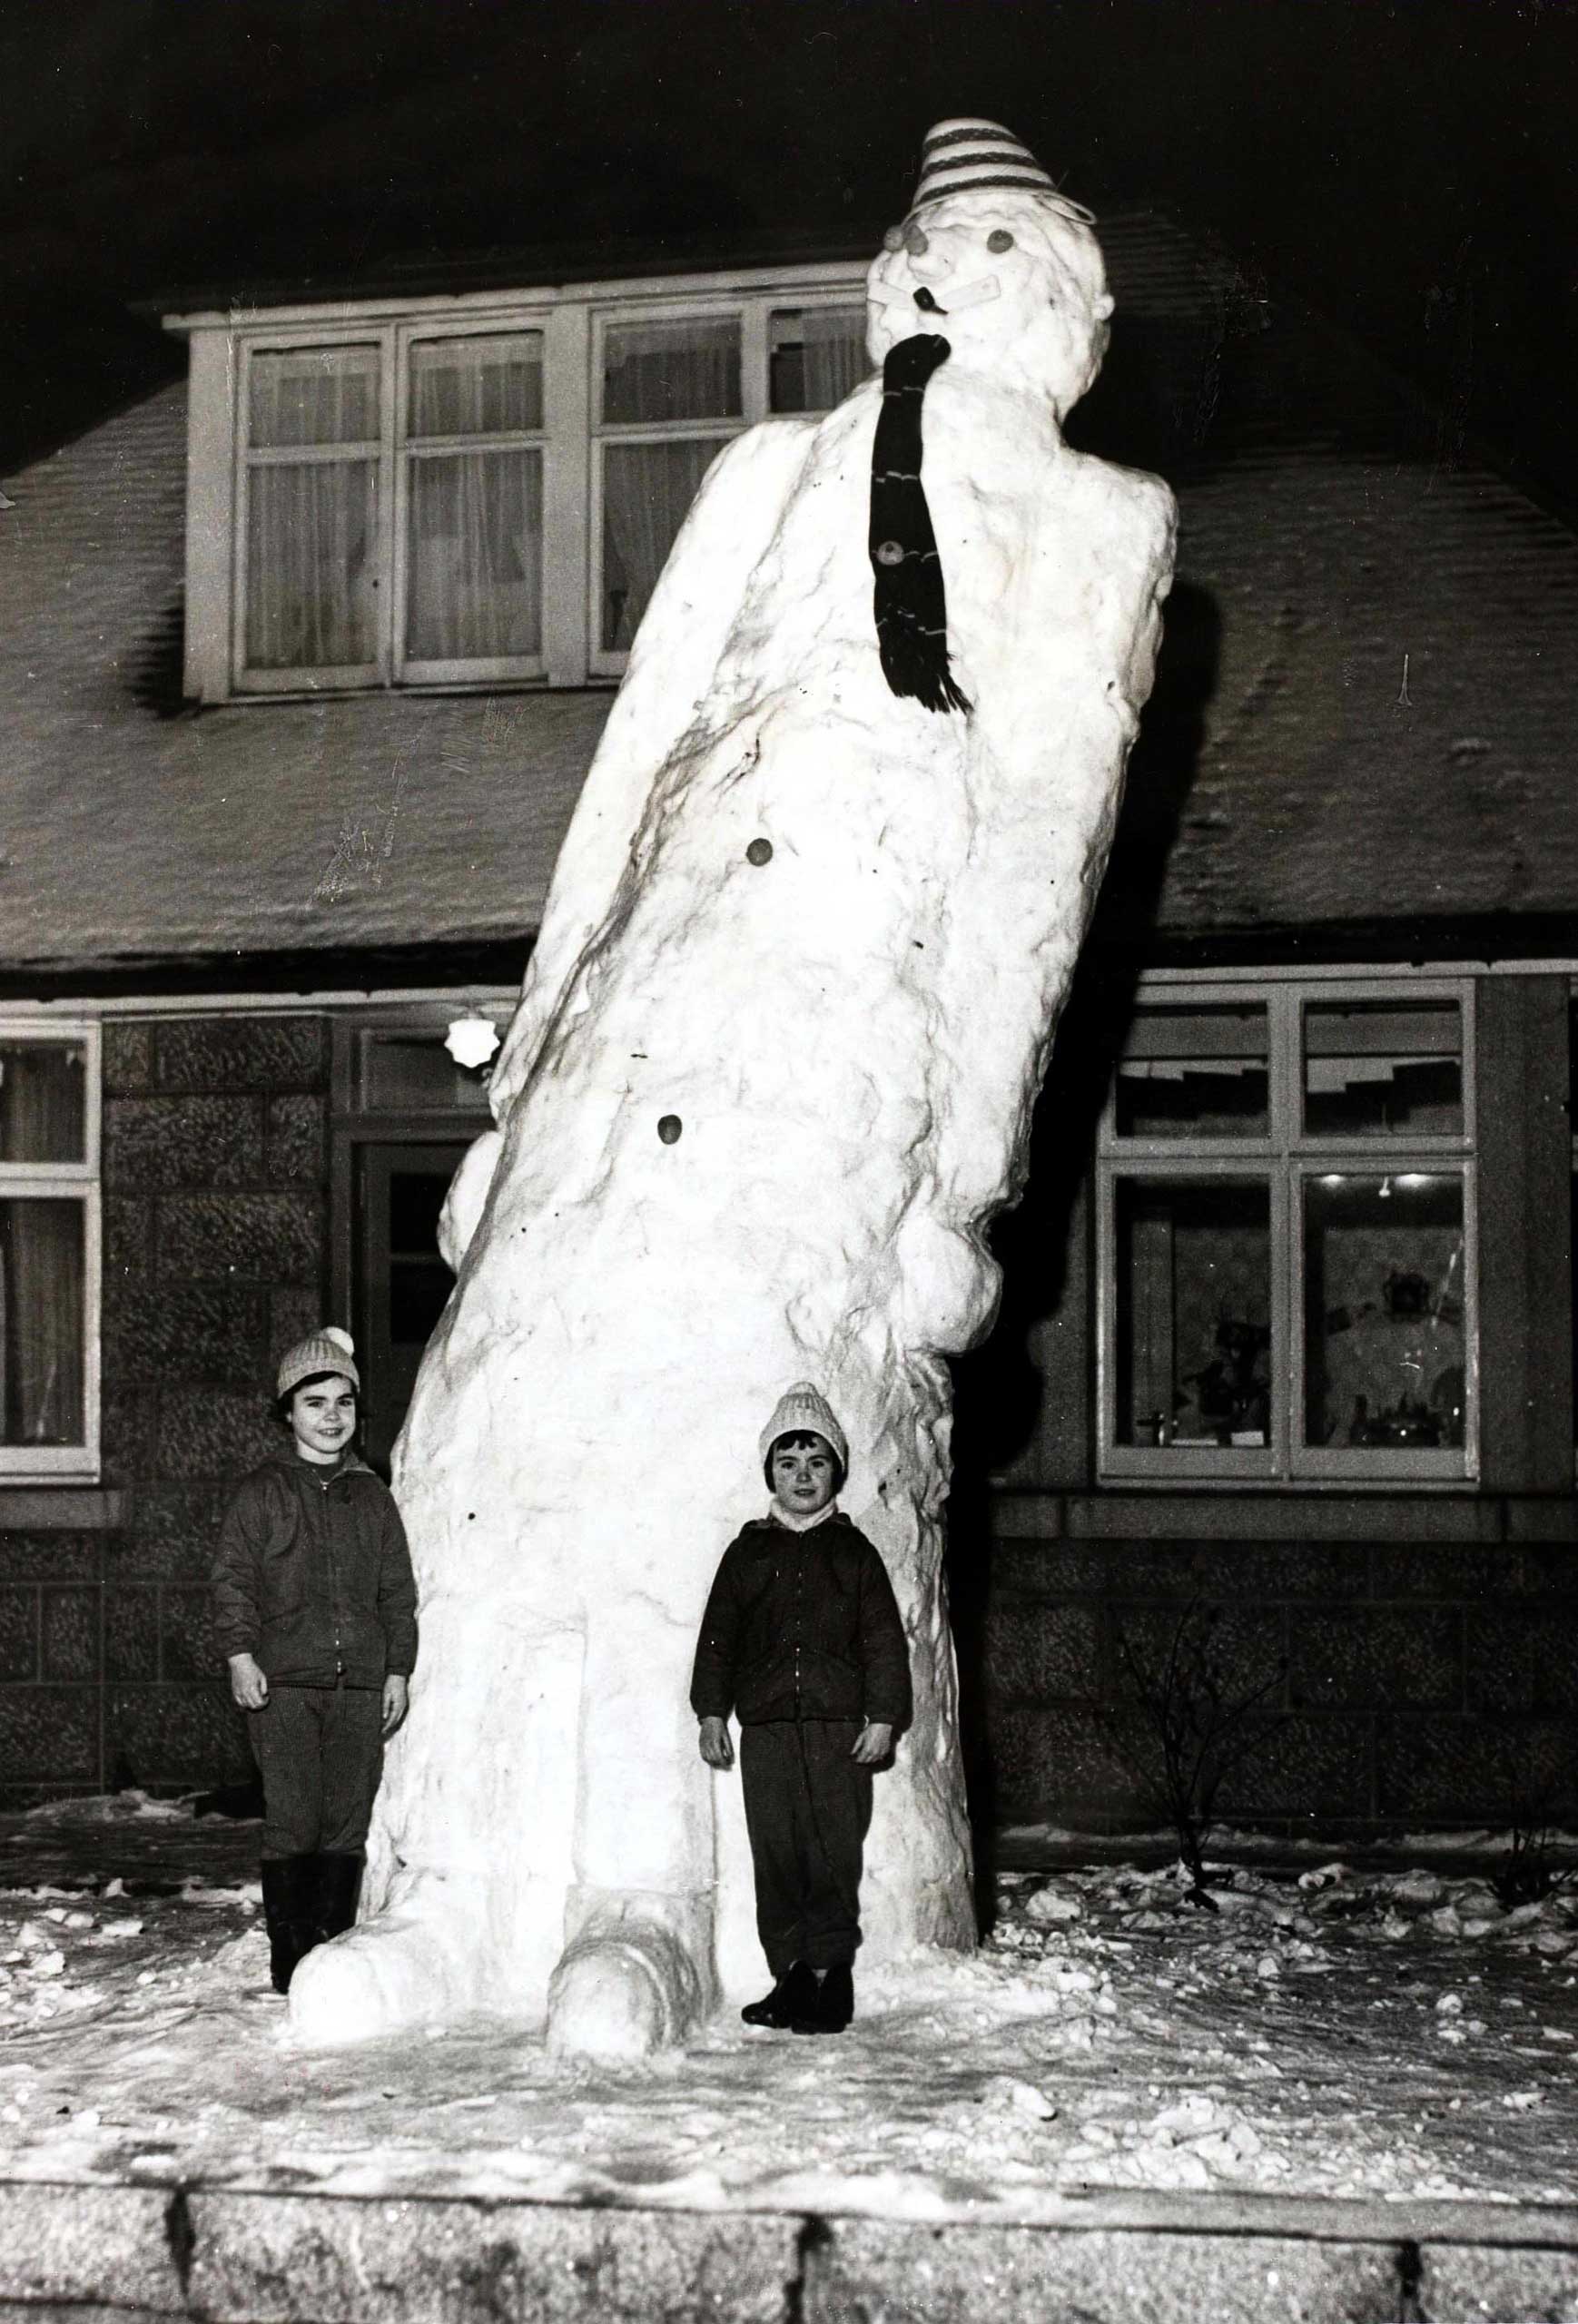 Popperfoto,The Book, Volume 1,Page: 100, Picture: 1, Giant snowman measuring seventeen feet made by two girls at Aberdeen, Scotland, 3rd January 1963